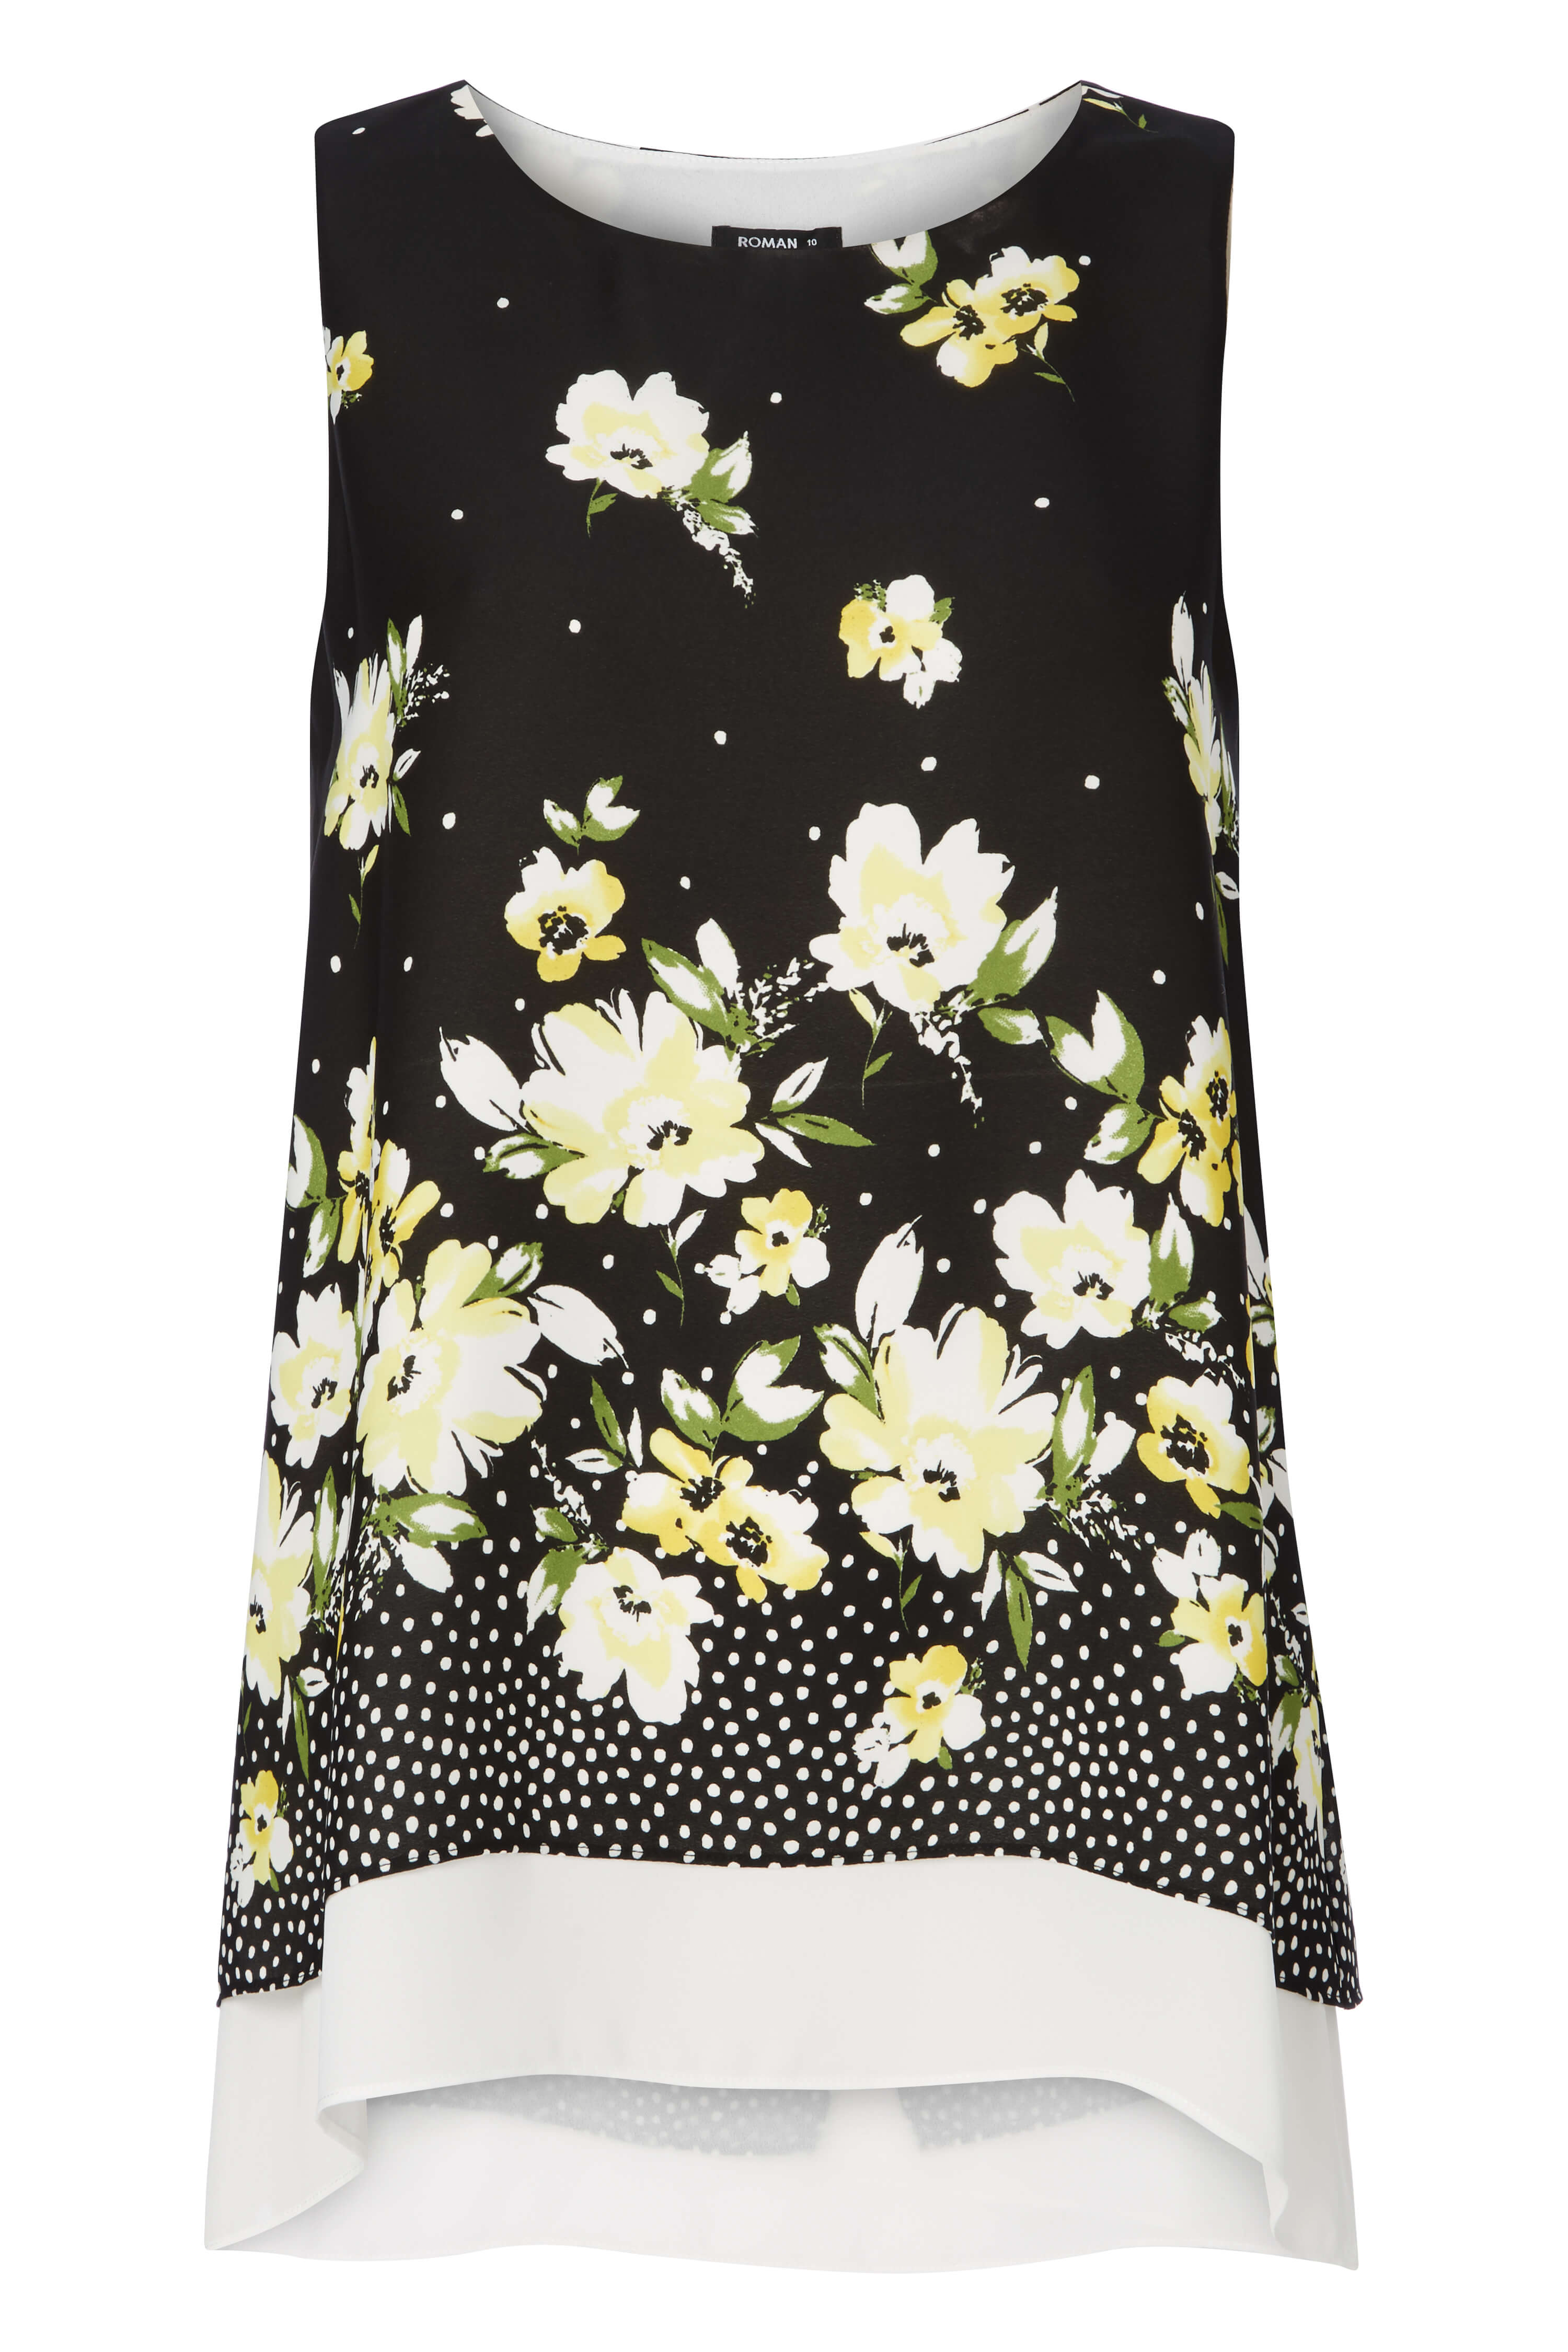 Black Floral Print Overlay Top, Image 5 of 5